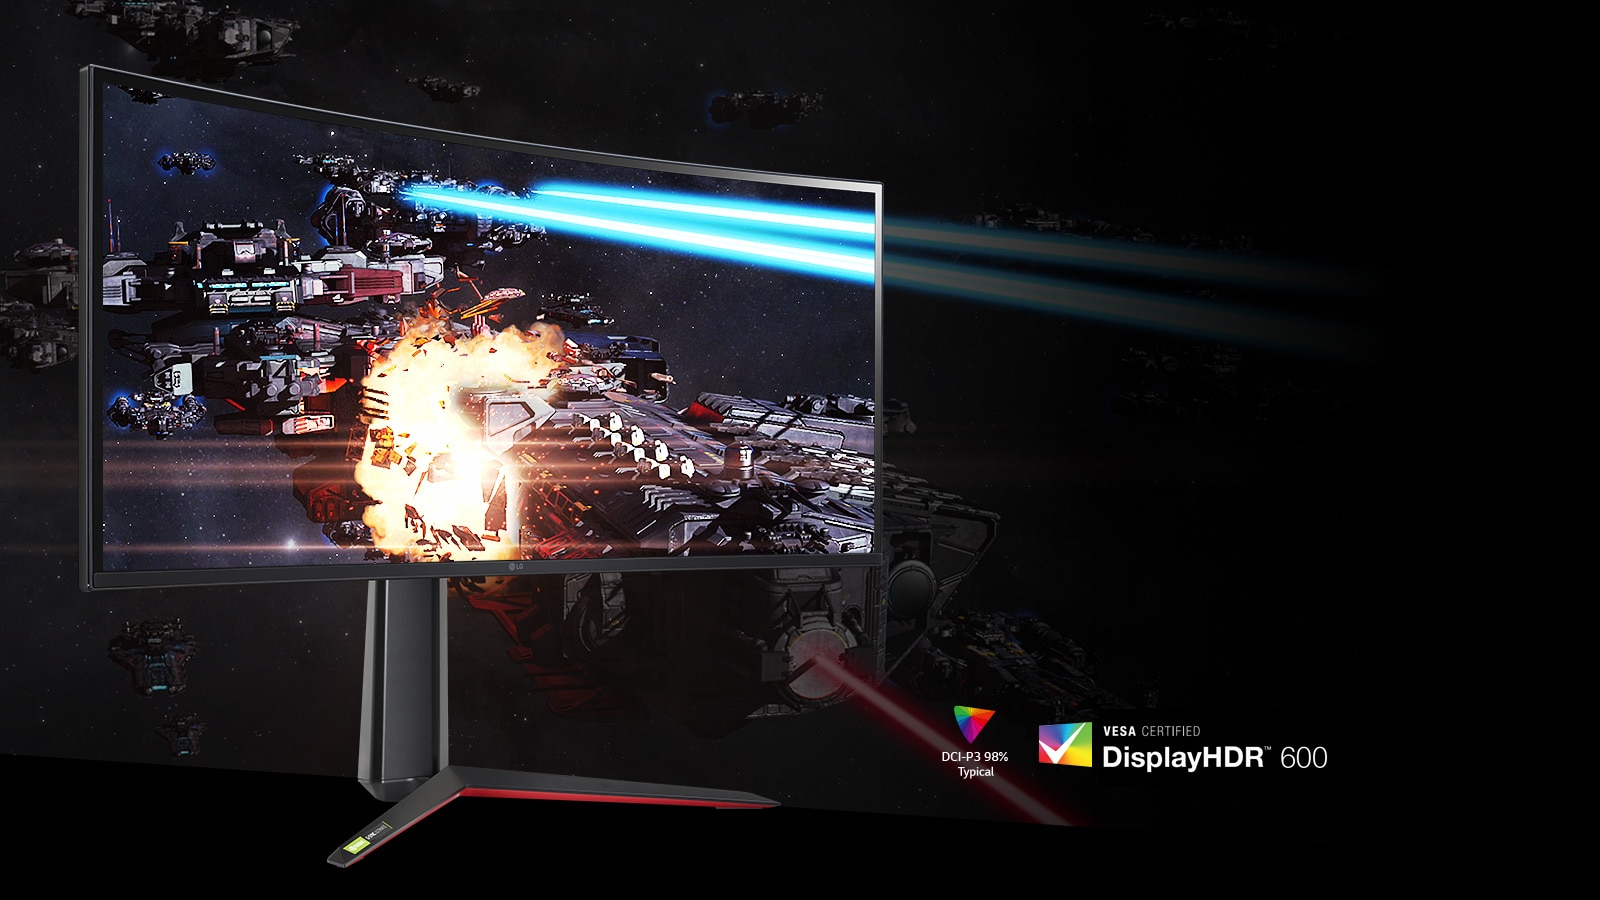 LG UltraGear curved gaming monitor displaying gaming scene in rich colors and contrast with VESA Display HDR600.